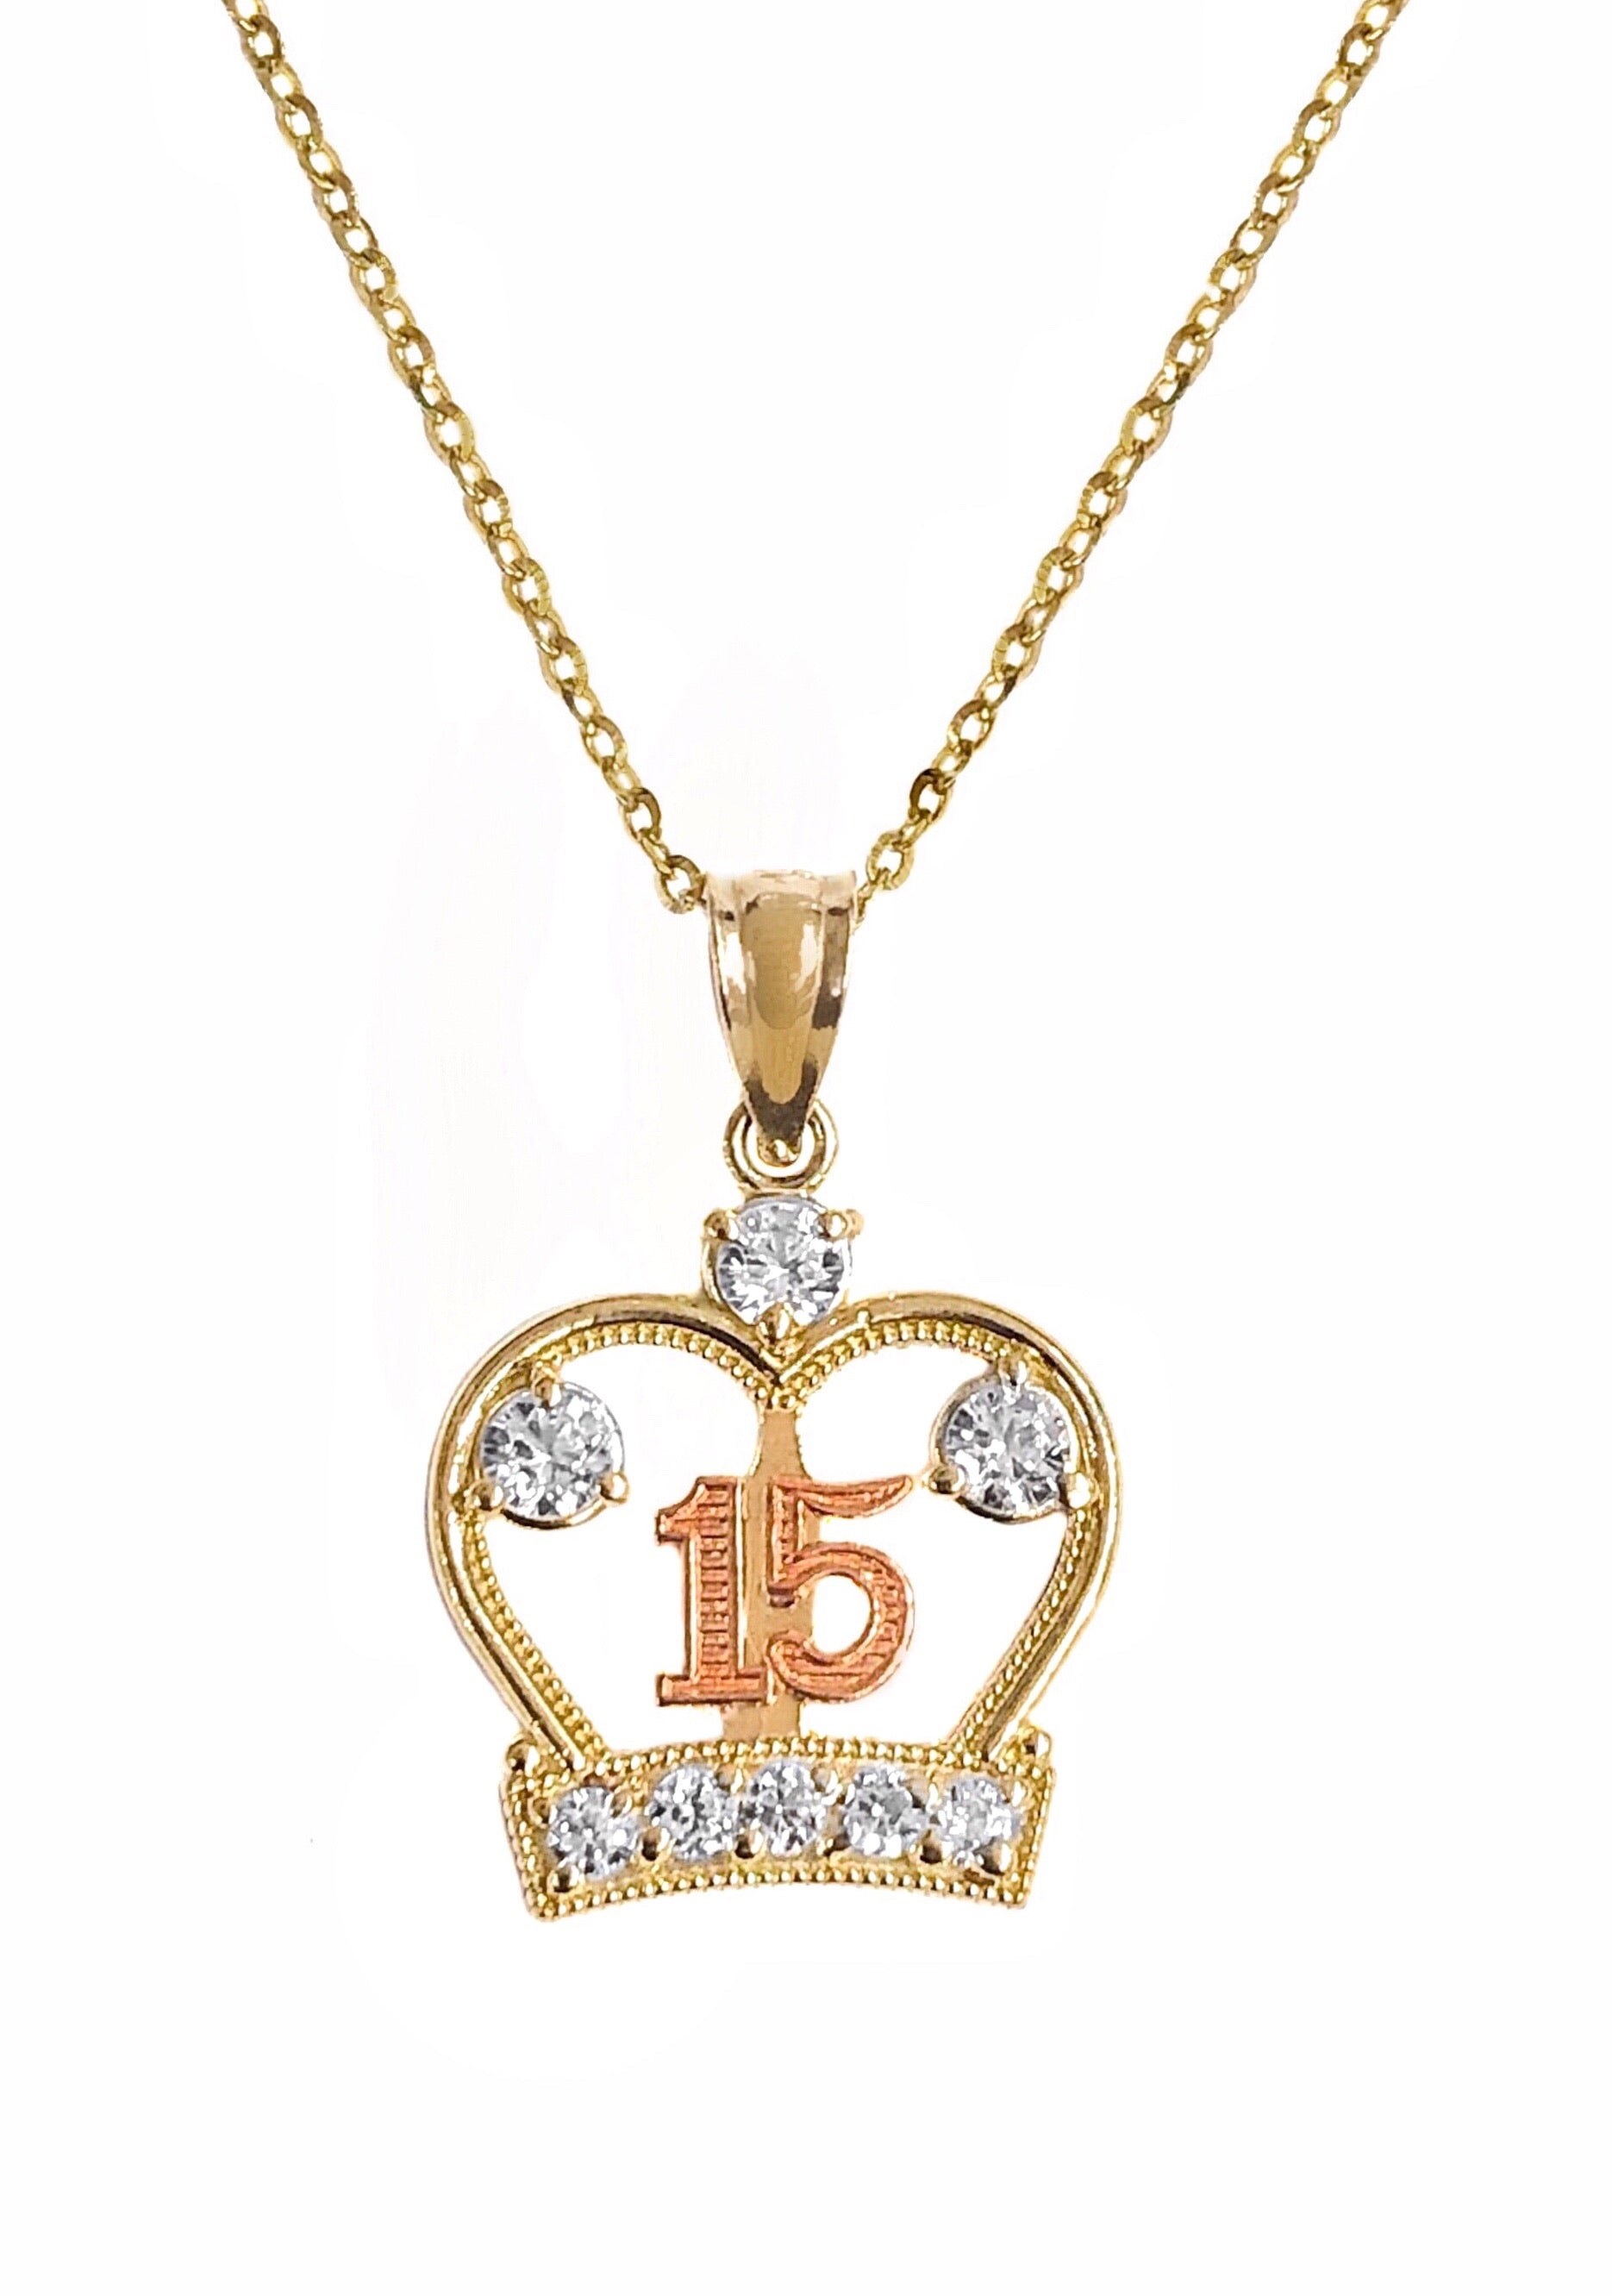 14K TRI COLOR GOLD IT'S MY 15 DAY NECKLACE